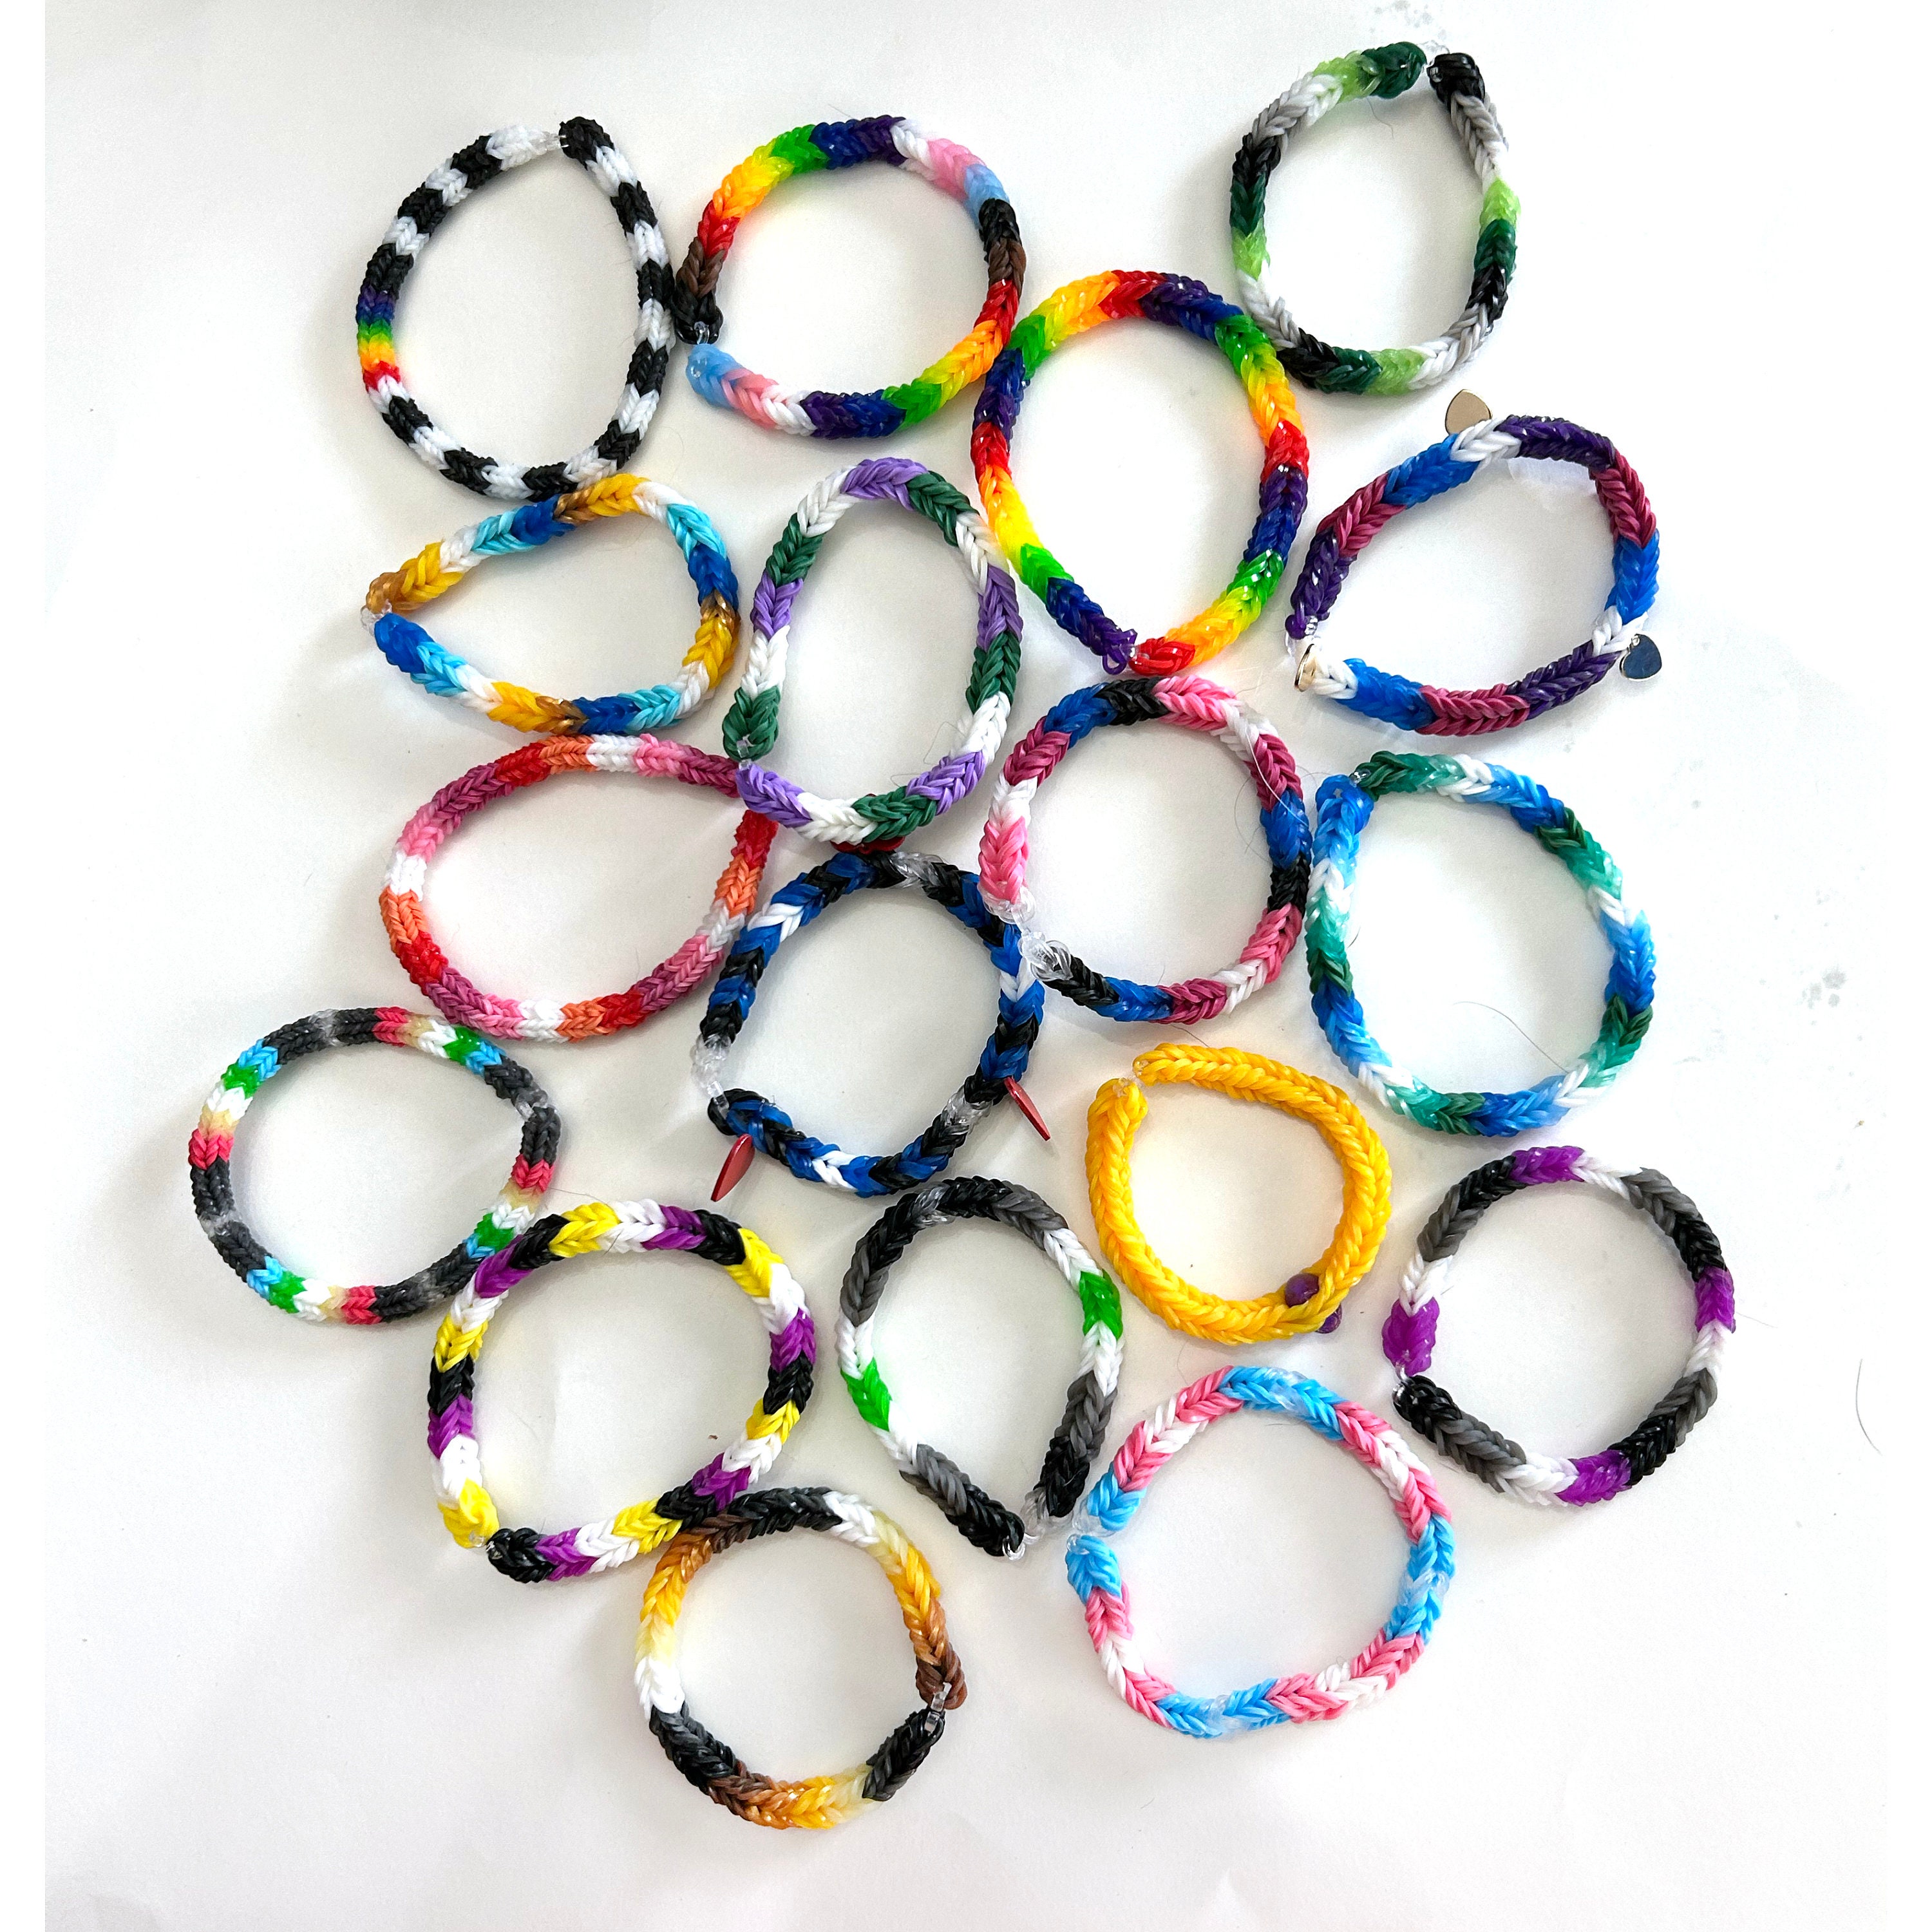 Rainbow Link Friendship Bracelet String Handmade, Adjustable, And Colorful  For Womens Fashion From Yw_mojojewelry, $0.69 | DHgate.Com